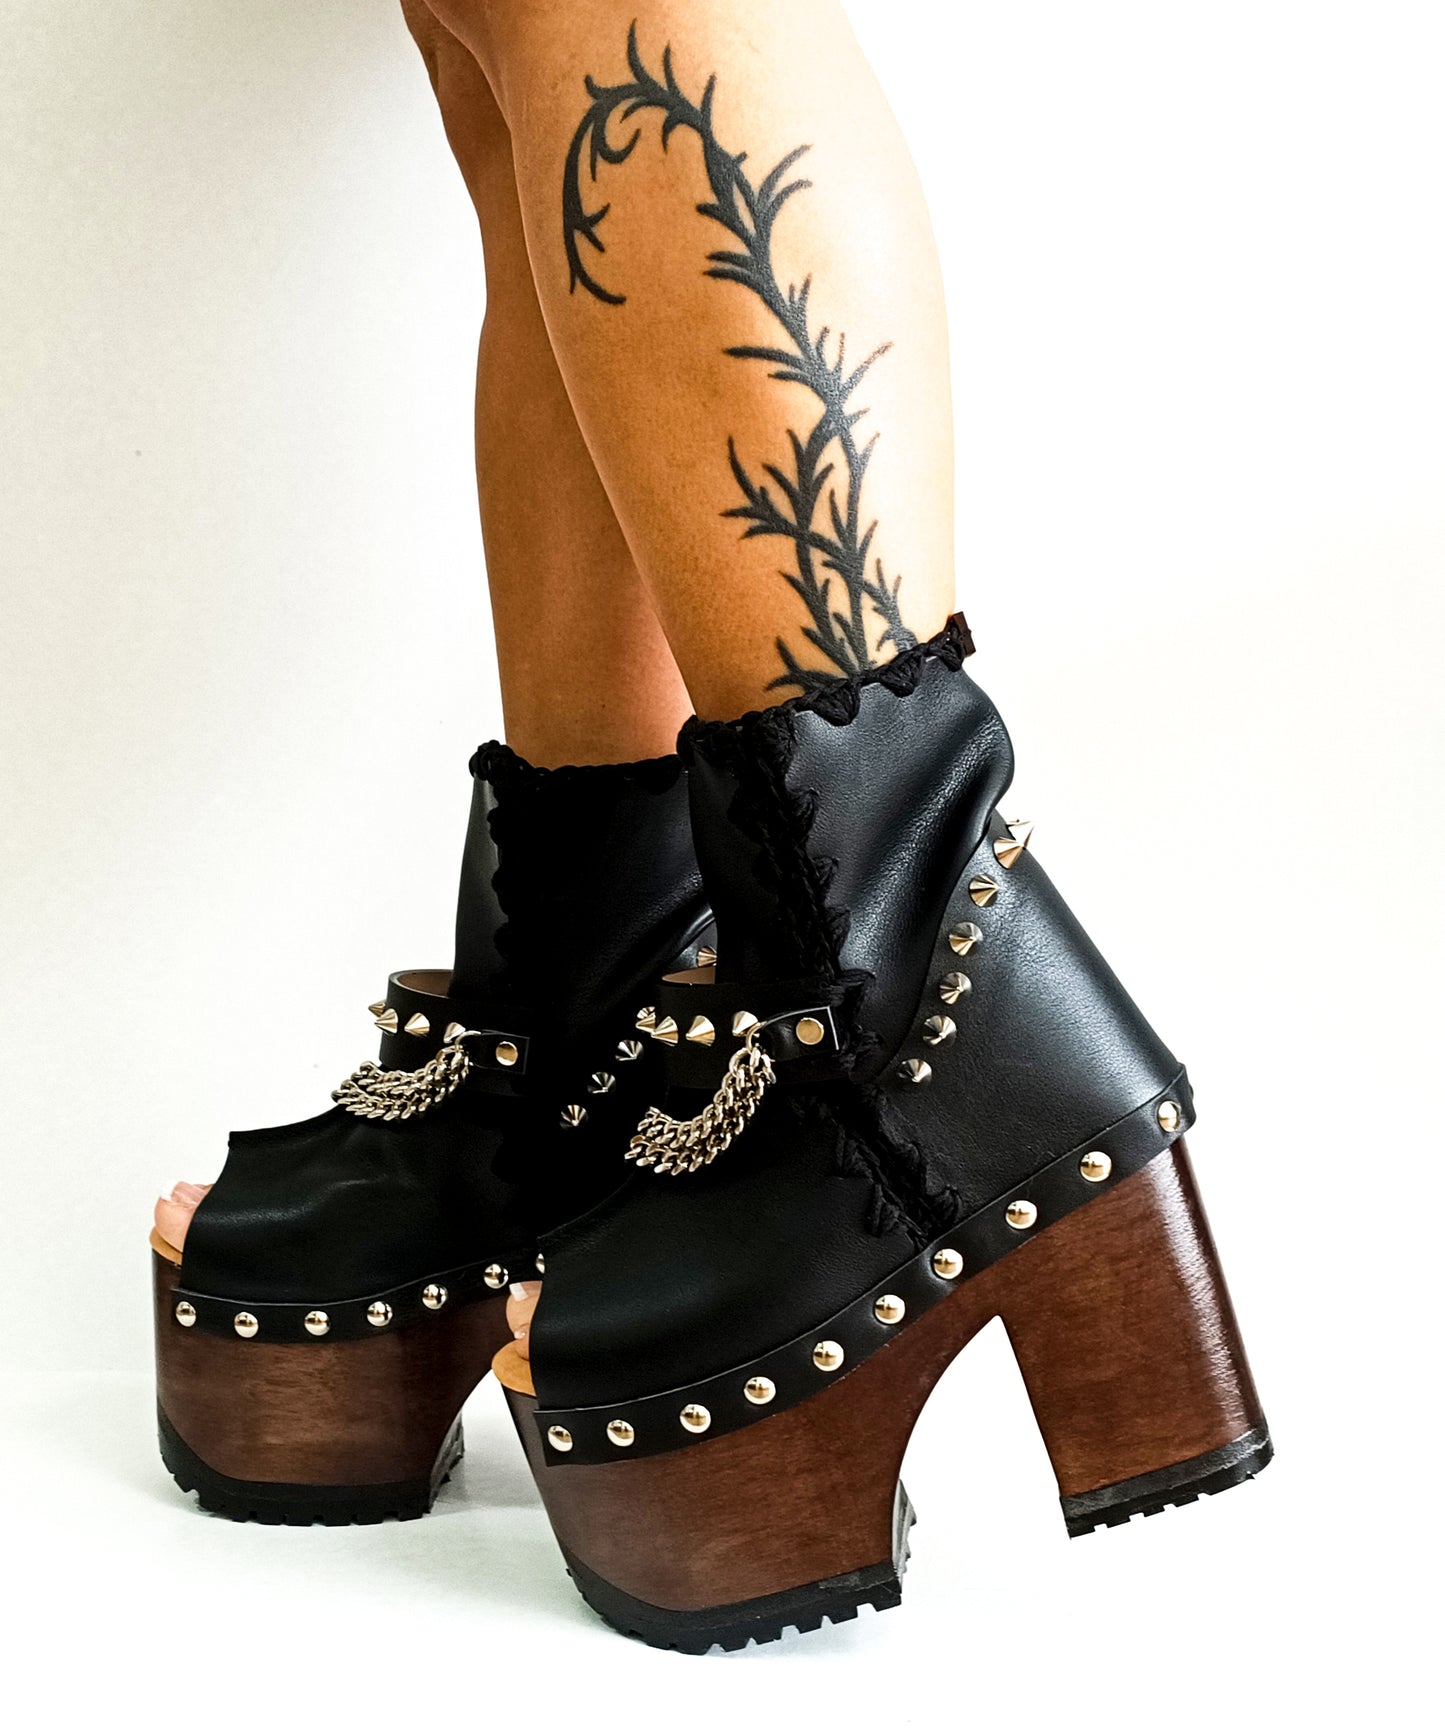 Black leather platform boot. Leather boot with super high wooden heel. Leather peep toe boot decorated with studs and silver chains. Platform boots with platform heel. Sizes 34 to 47. High quality leather shoes handmade by sol Caleyo. Sustainable fashion.